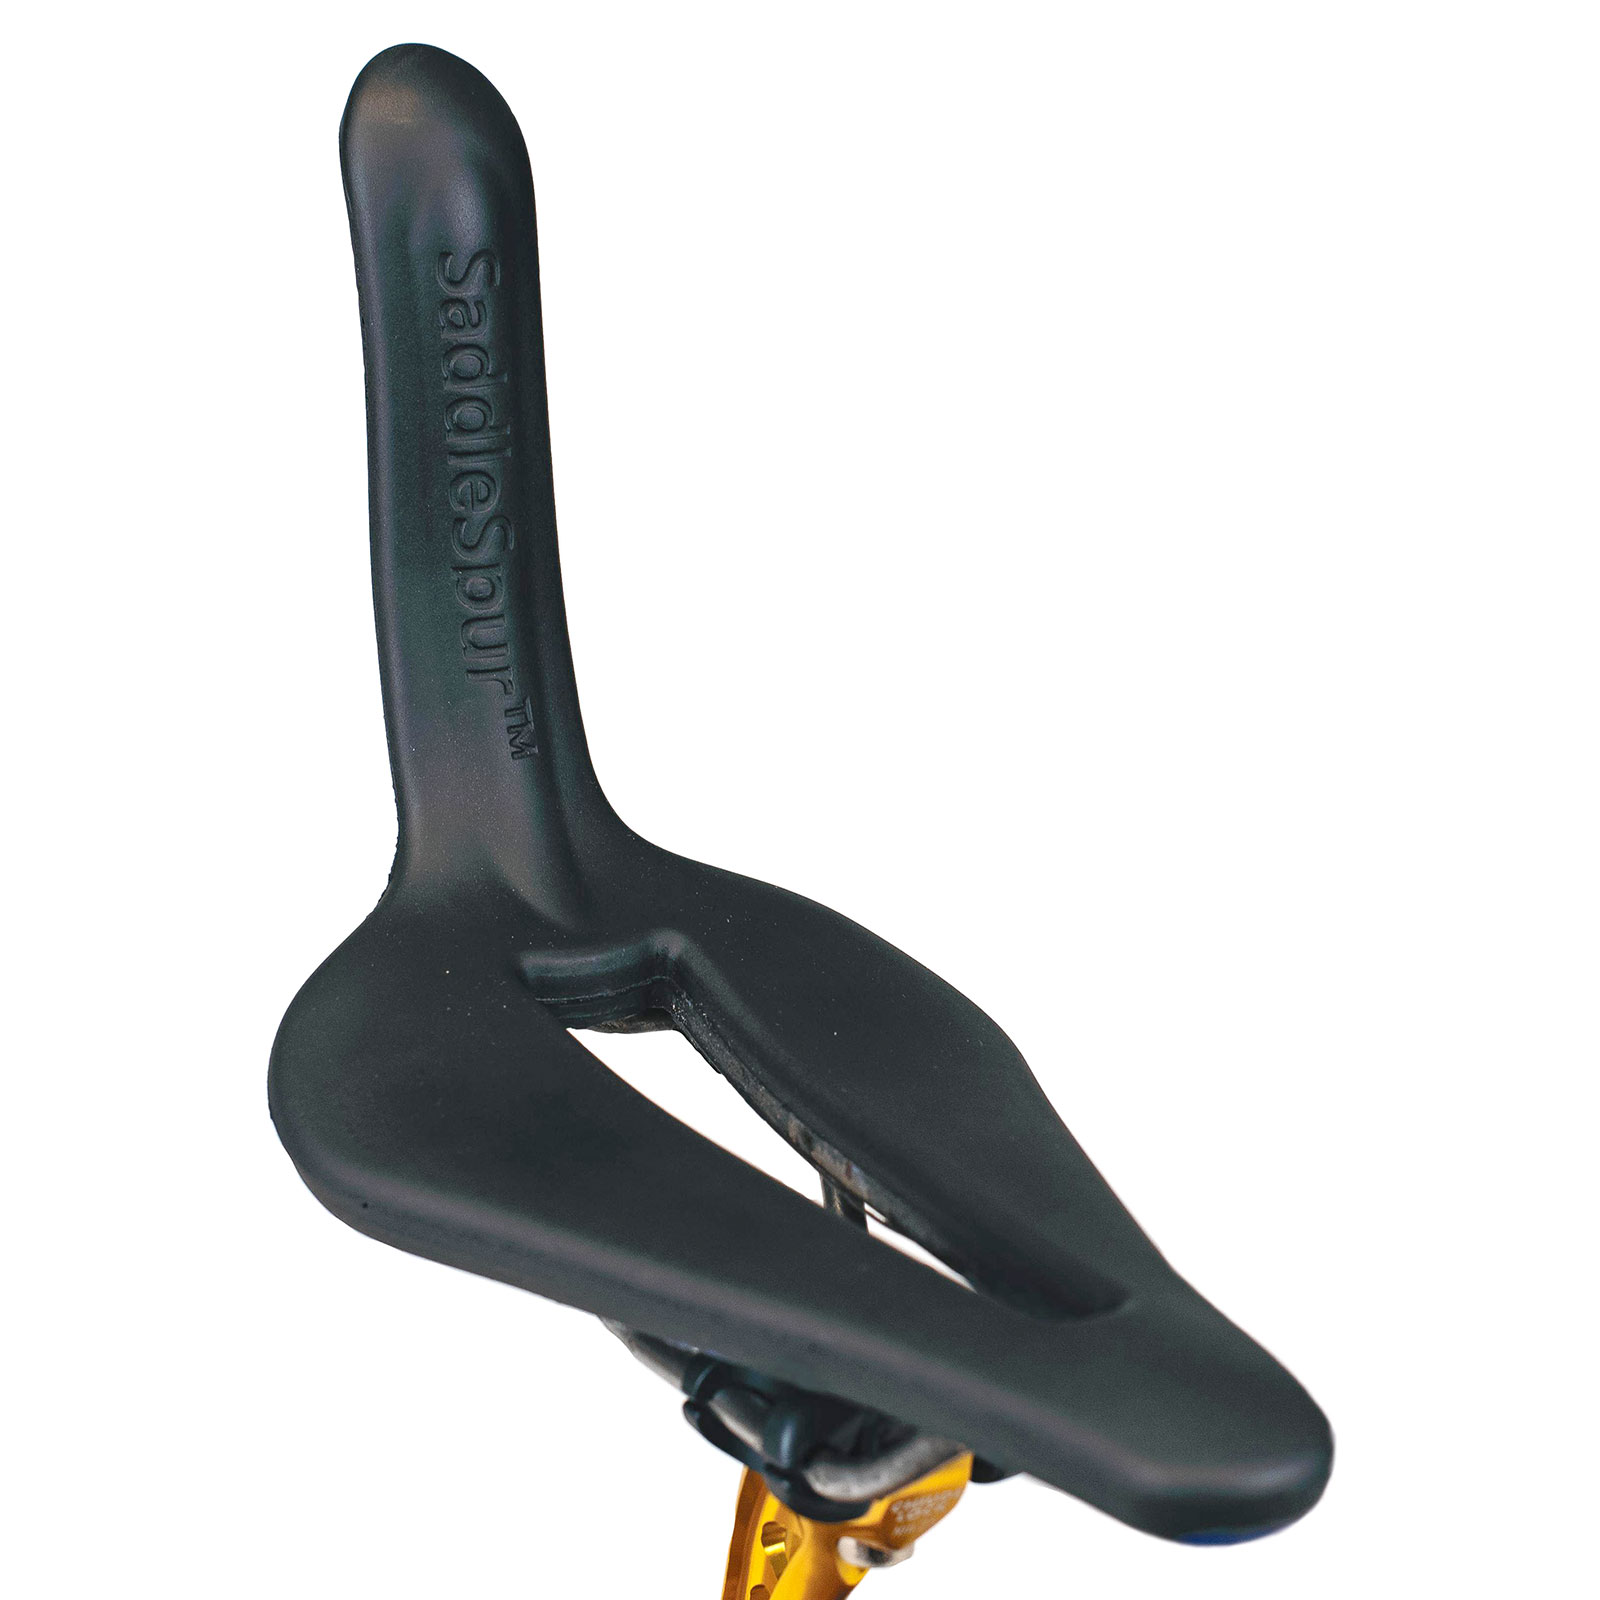 SaddleSpur unique ergonomic cycling saddle design with rear coccyx support, dildo